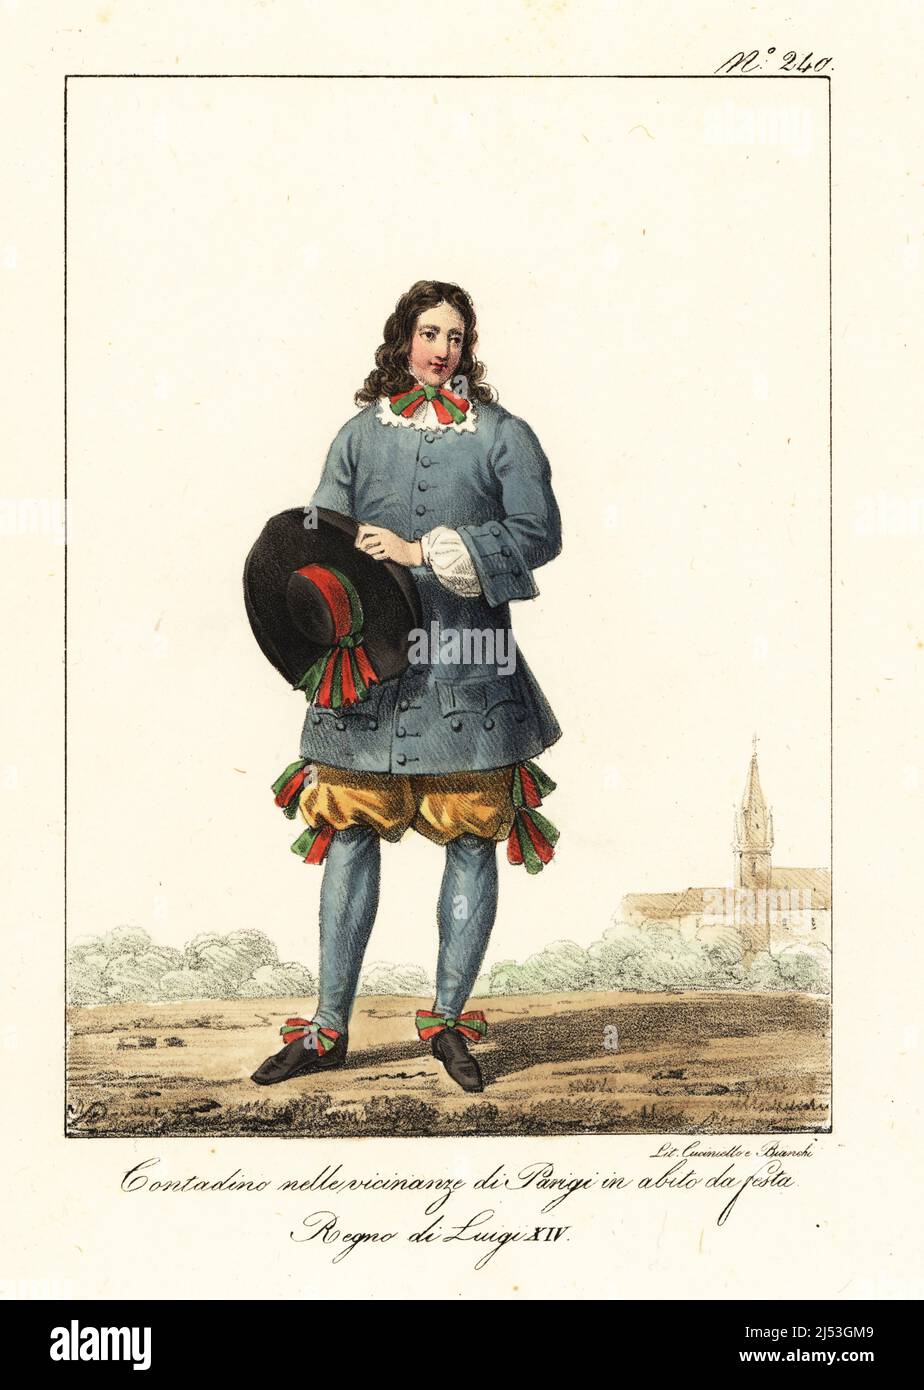 Parisian peasant in festival costume, 17th century. In coat, breeches, gaiters, and wide-brim hat, all decorated with red and green ribbons. Paysan des environs de Paris, en habit de Fete. Regne de Louis XIV. Handcoloured lithograph by Lorenzo Bianchi and Domenico Cuciniello after Hippolyte Lecomte from Costumi civili e militari della monarchia francese dal 1200 al 1820, Naples, 1825. Italian edition of Lecomte’s Civilian and military costumes of the French monarchy from 1200 to 1820. Stock Photo